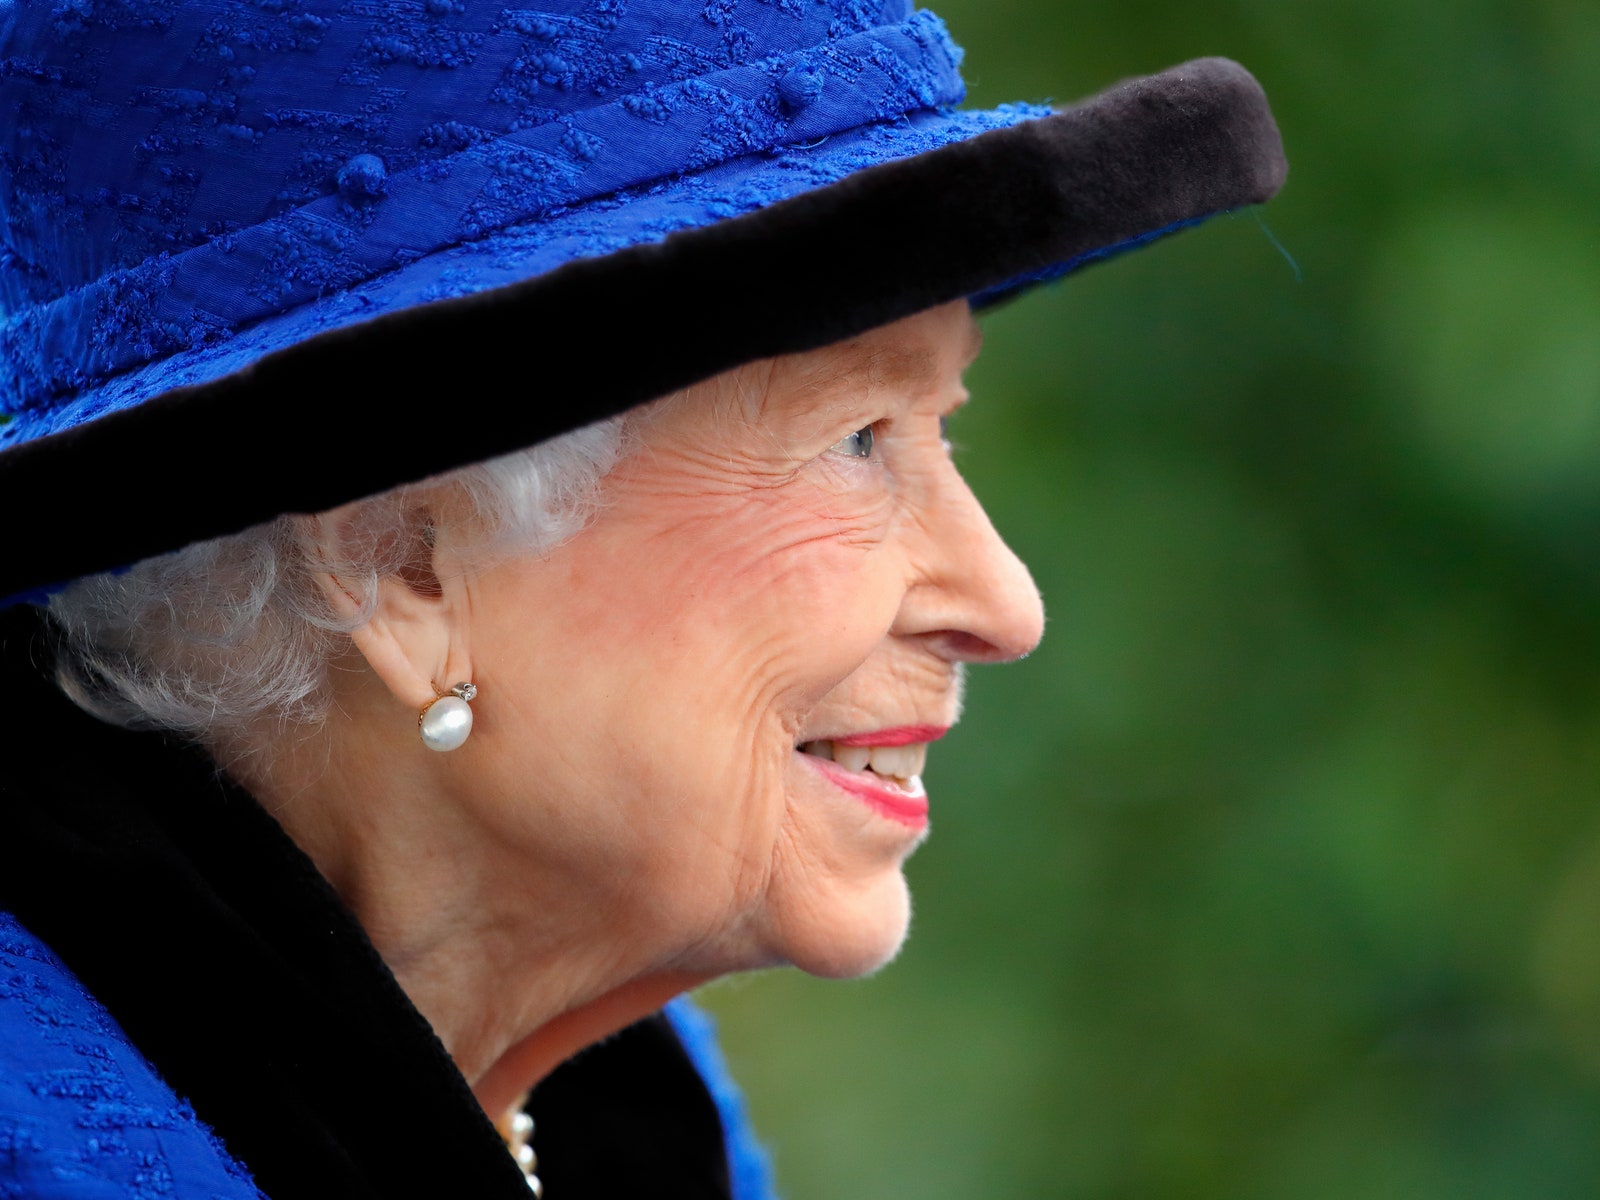 Queen Elizabeth II attends QIPCO British Champions Day at Ascot Racecourse on October 16 2021 in Ascot England.